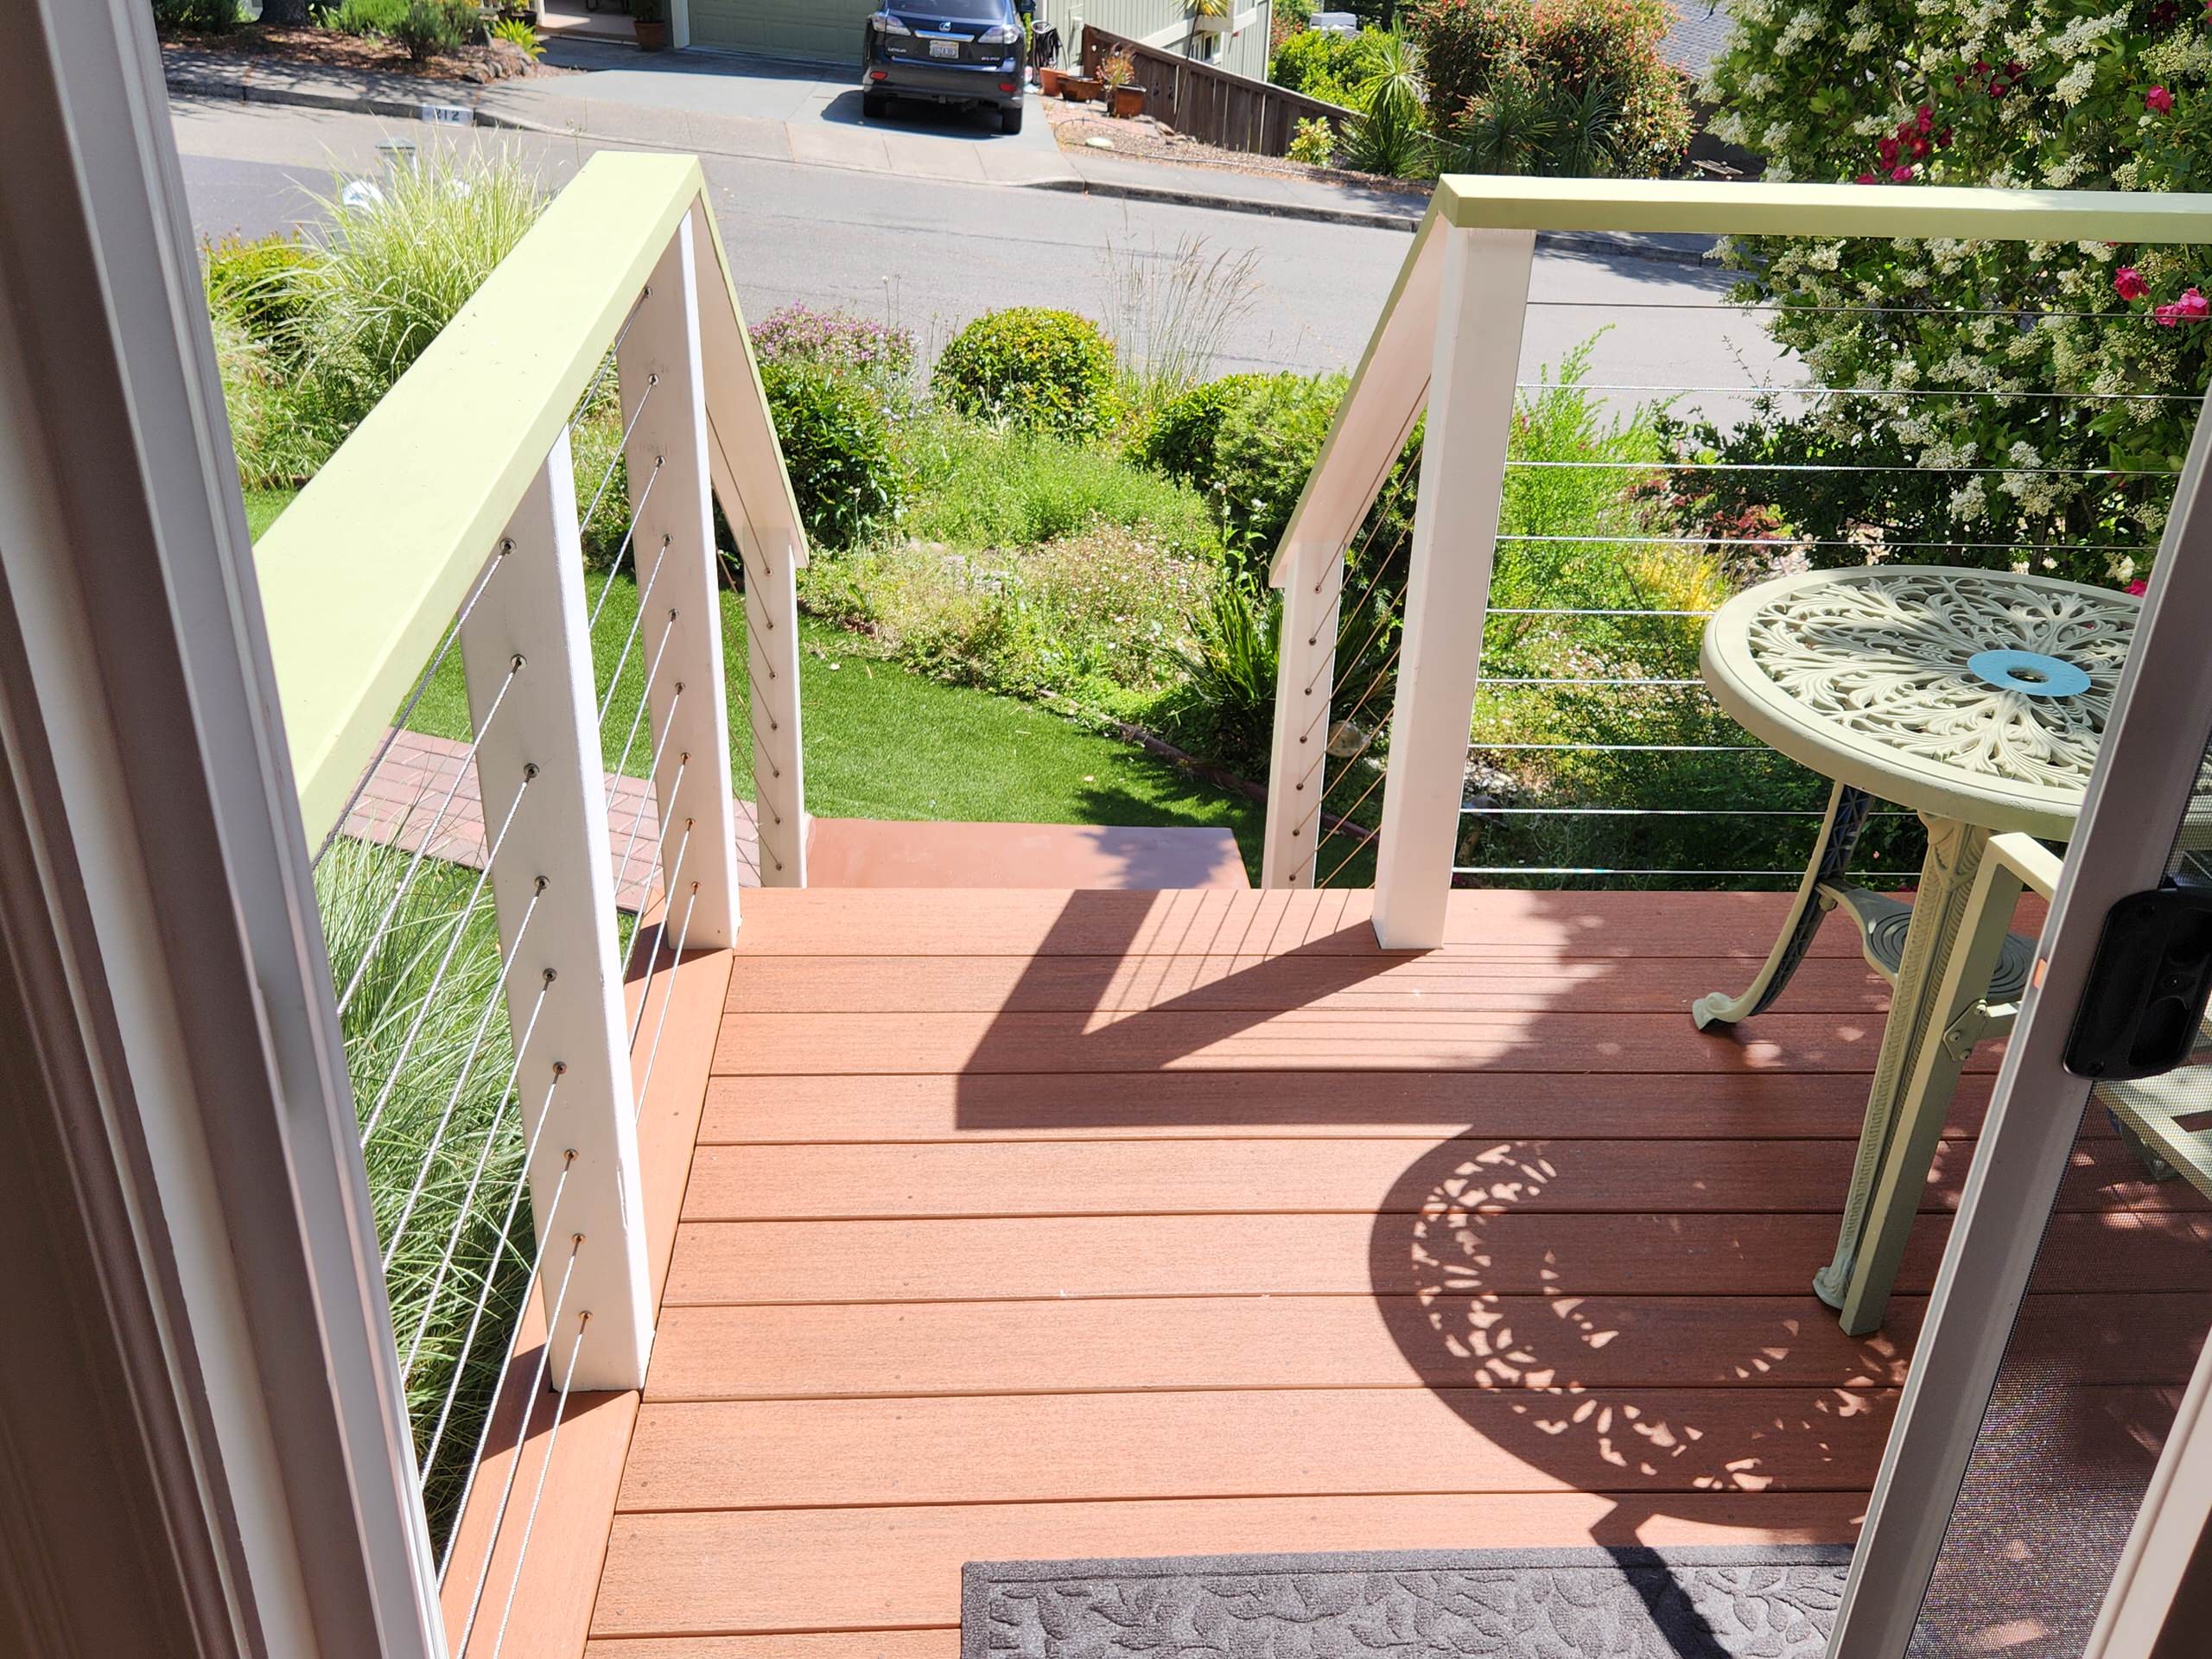 Install new deck,bench,with cable rail systems